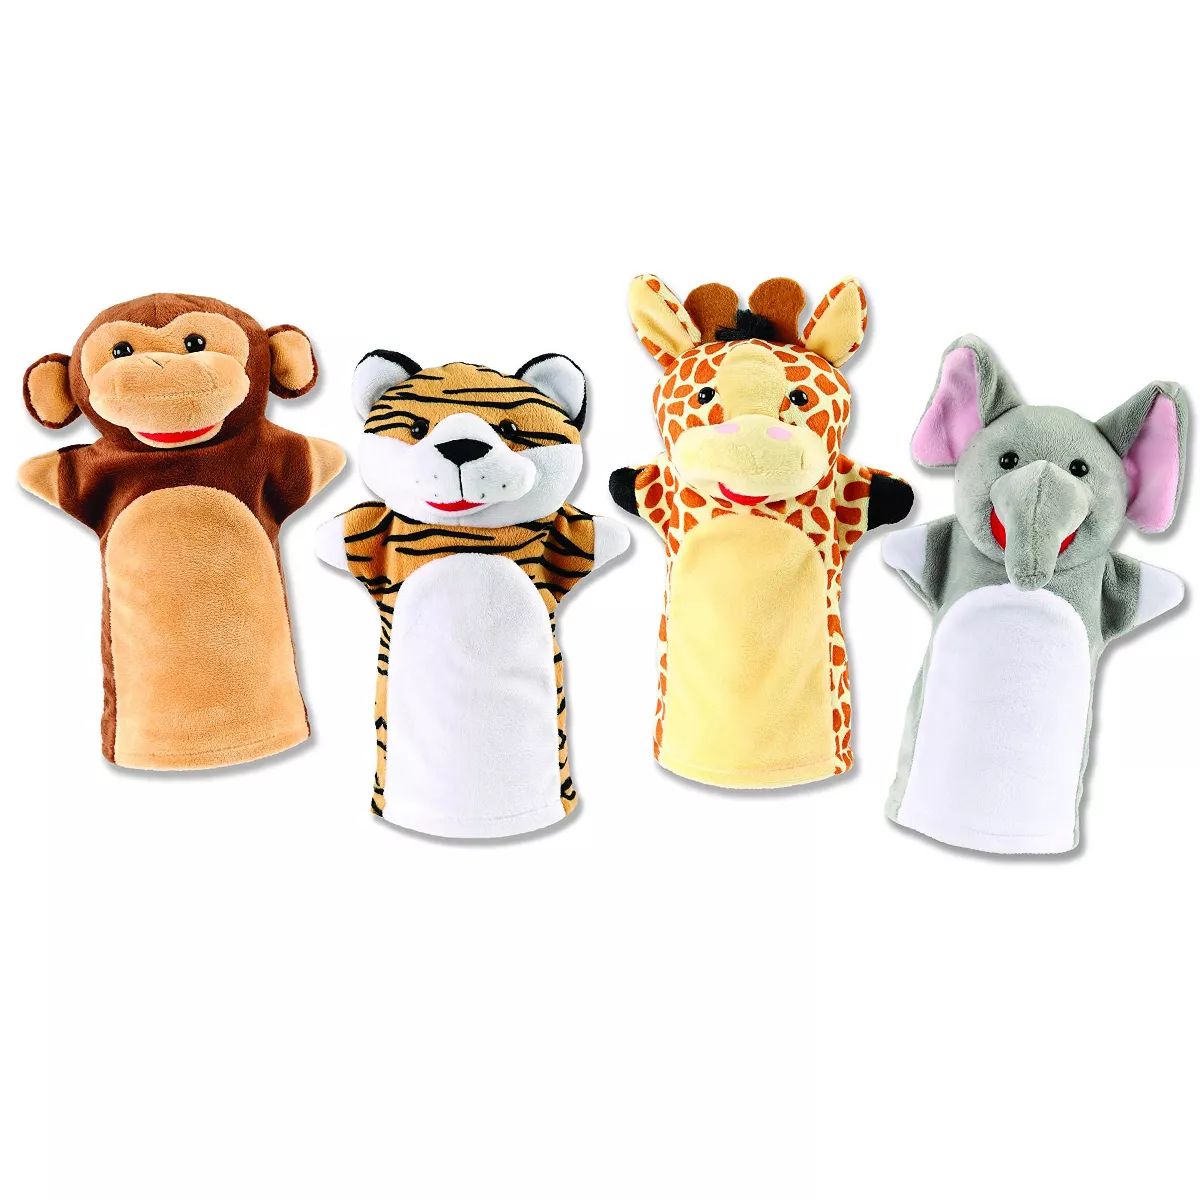 Animal Hand Puppets - Monkey, Tiger, Giraffe & Elephant Each with Sound | Target